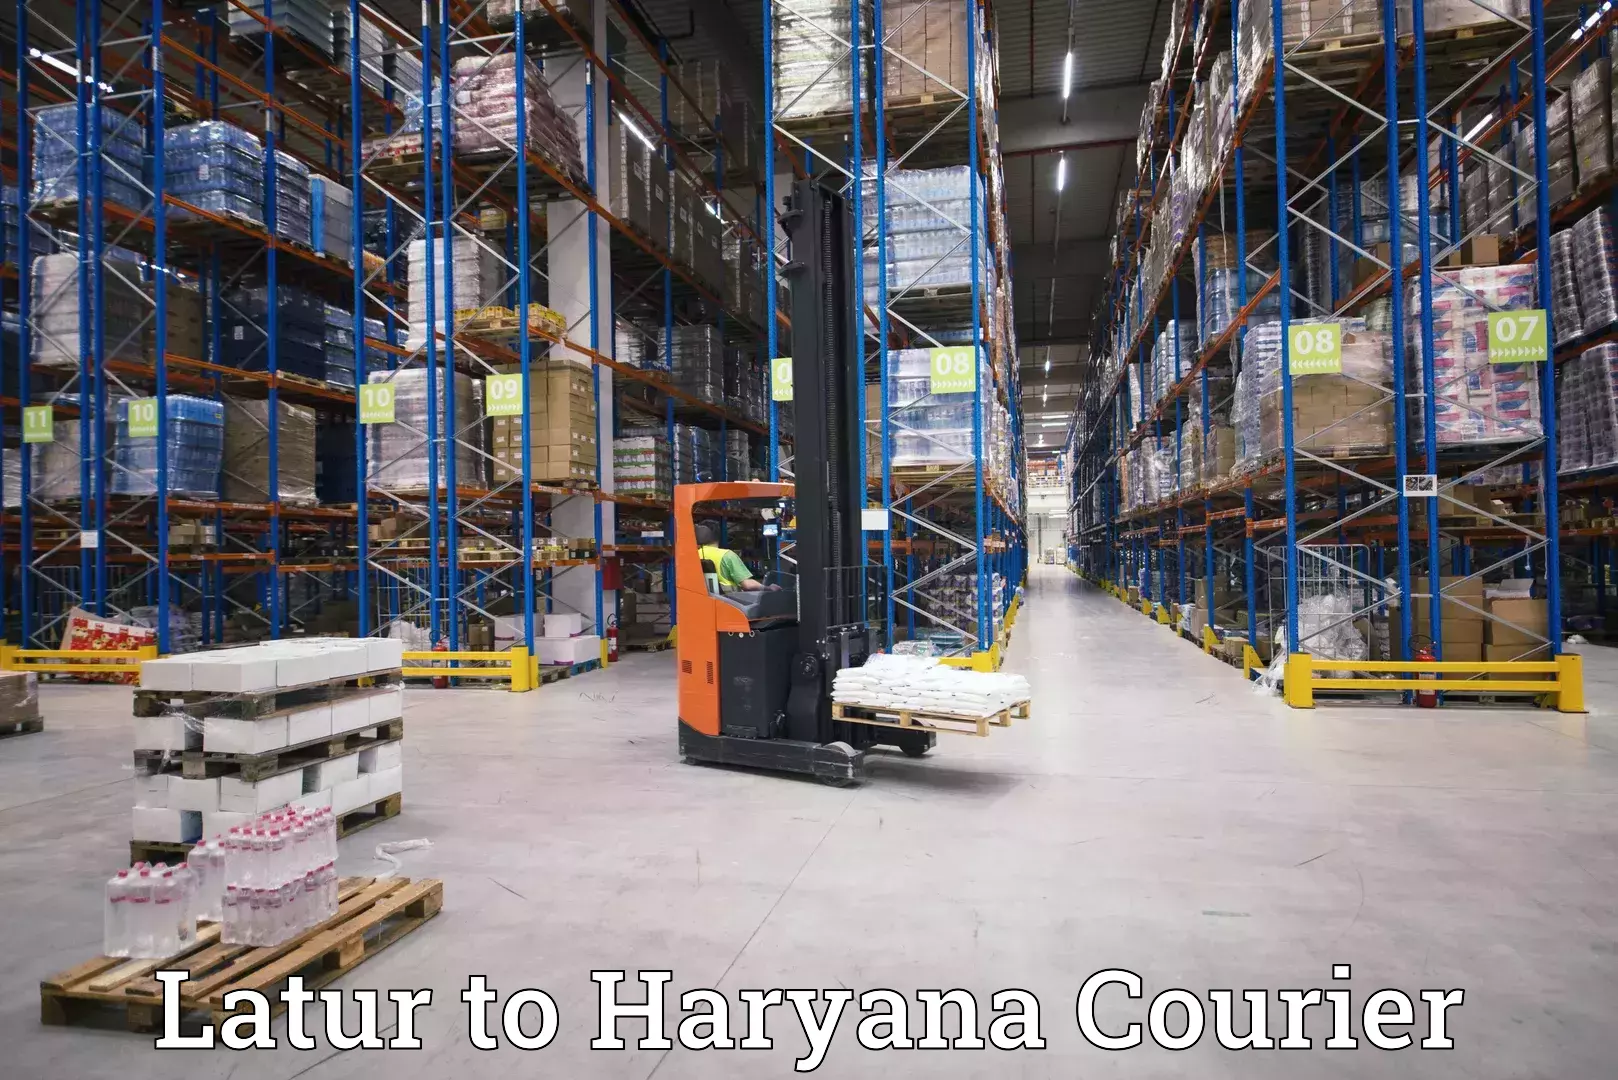 Sustainable courier practices Latur to NCR Haryana